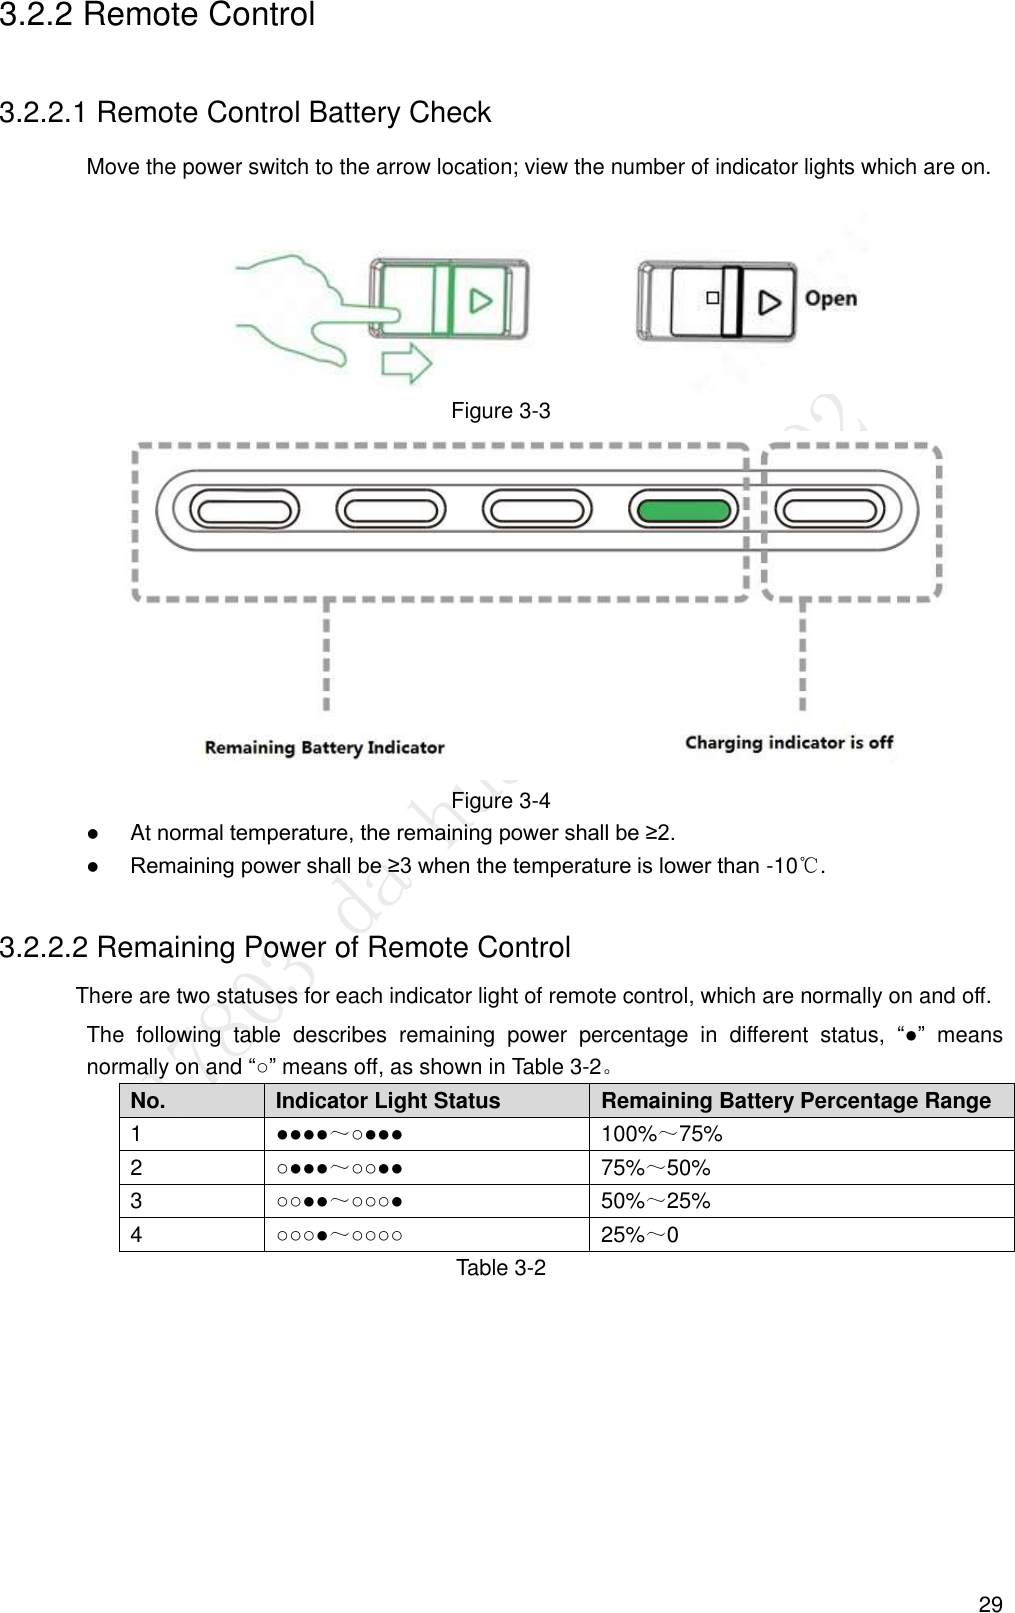  29 3.2.2 Remote Control 3.2.2.1 Remote Control Battery Check Move the power switch to the arrow location; view the number of indicator lights which are on.  Figure 3-3  Figure 3-4  At normal temperature, the remaining power shall be ≥2.  Remaining power shall be ≥3 when the temperature is lower than -10℃. 3.2.2.2 Remaining Power of Remote Control There are two statuses for each indicator light of remote control, which are normally on and off. The  following  table  describes  remaining  power  percentage  in  different  status,  “●”  means normally on and “○” means off, as shown in Table 3-2。 No. Indicator Light Status Remaining Battery Percentage Range 1 ●●●●～○●●● 100%～75% 2 ○●●●～○○●● 75%～50% 3 ○○●●～○○○● 50%～25% 4 ○○○●～○○○○ 25%～0 Table 3-2 